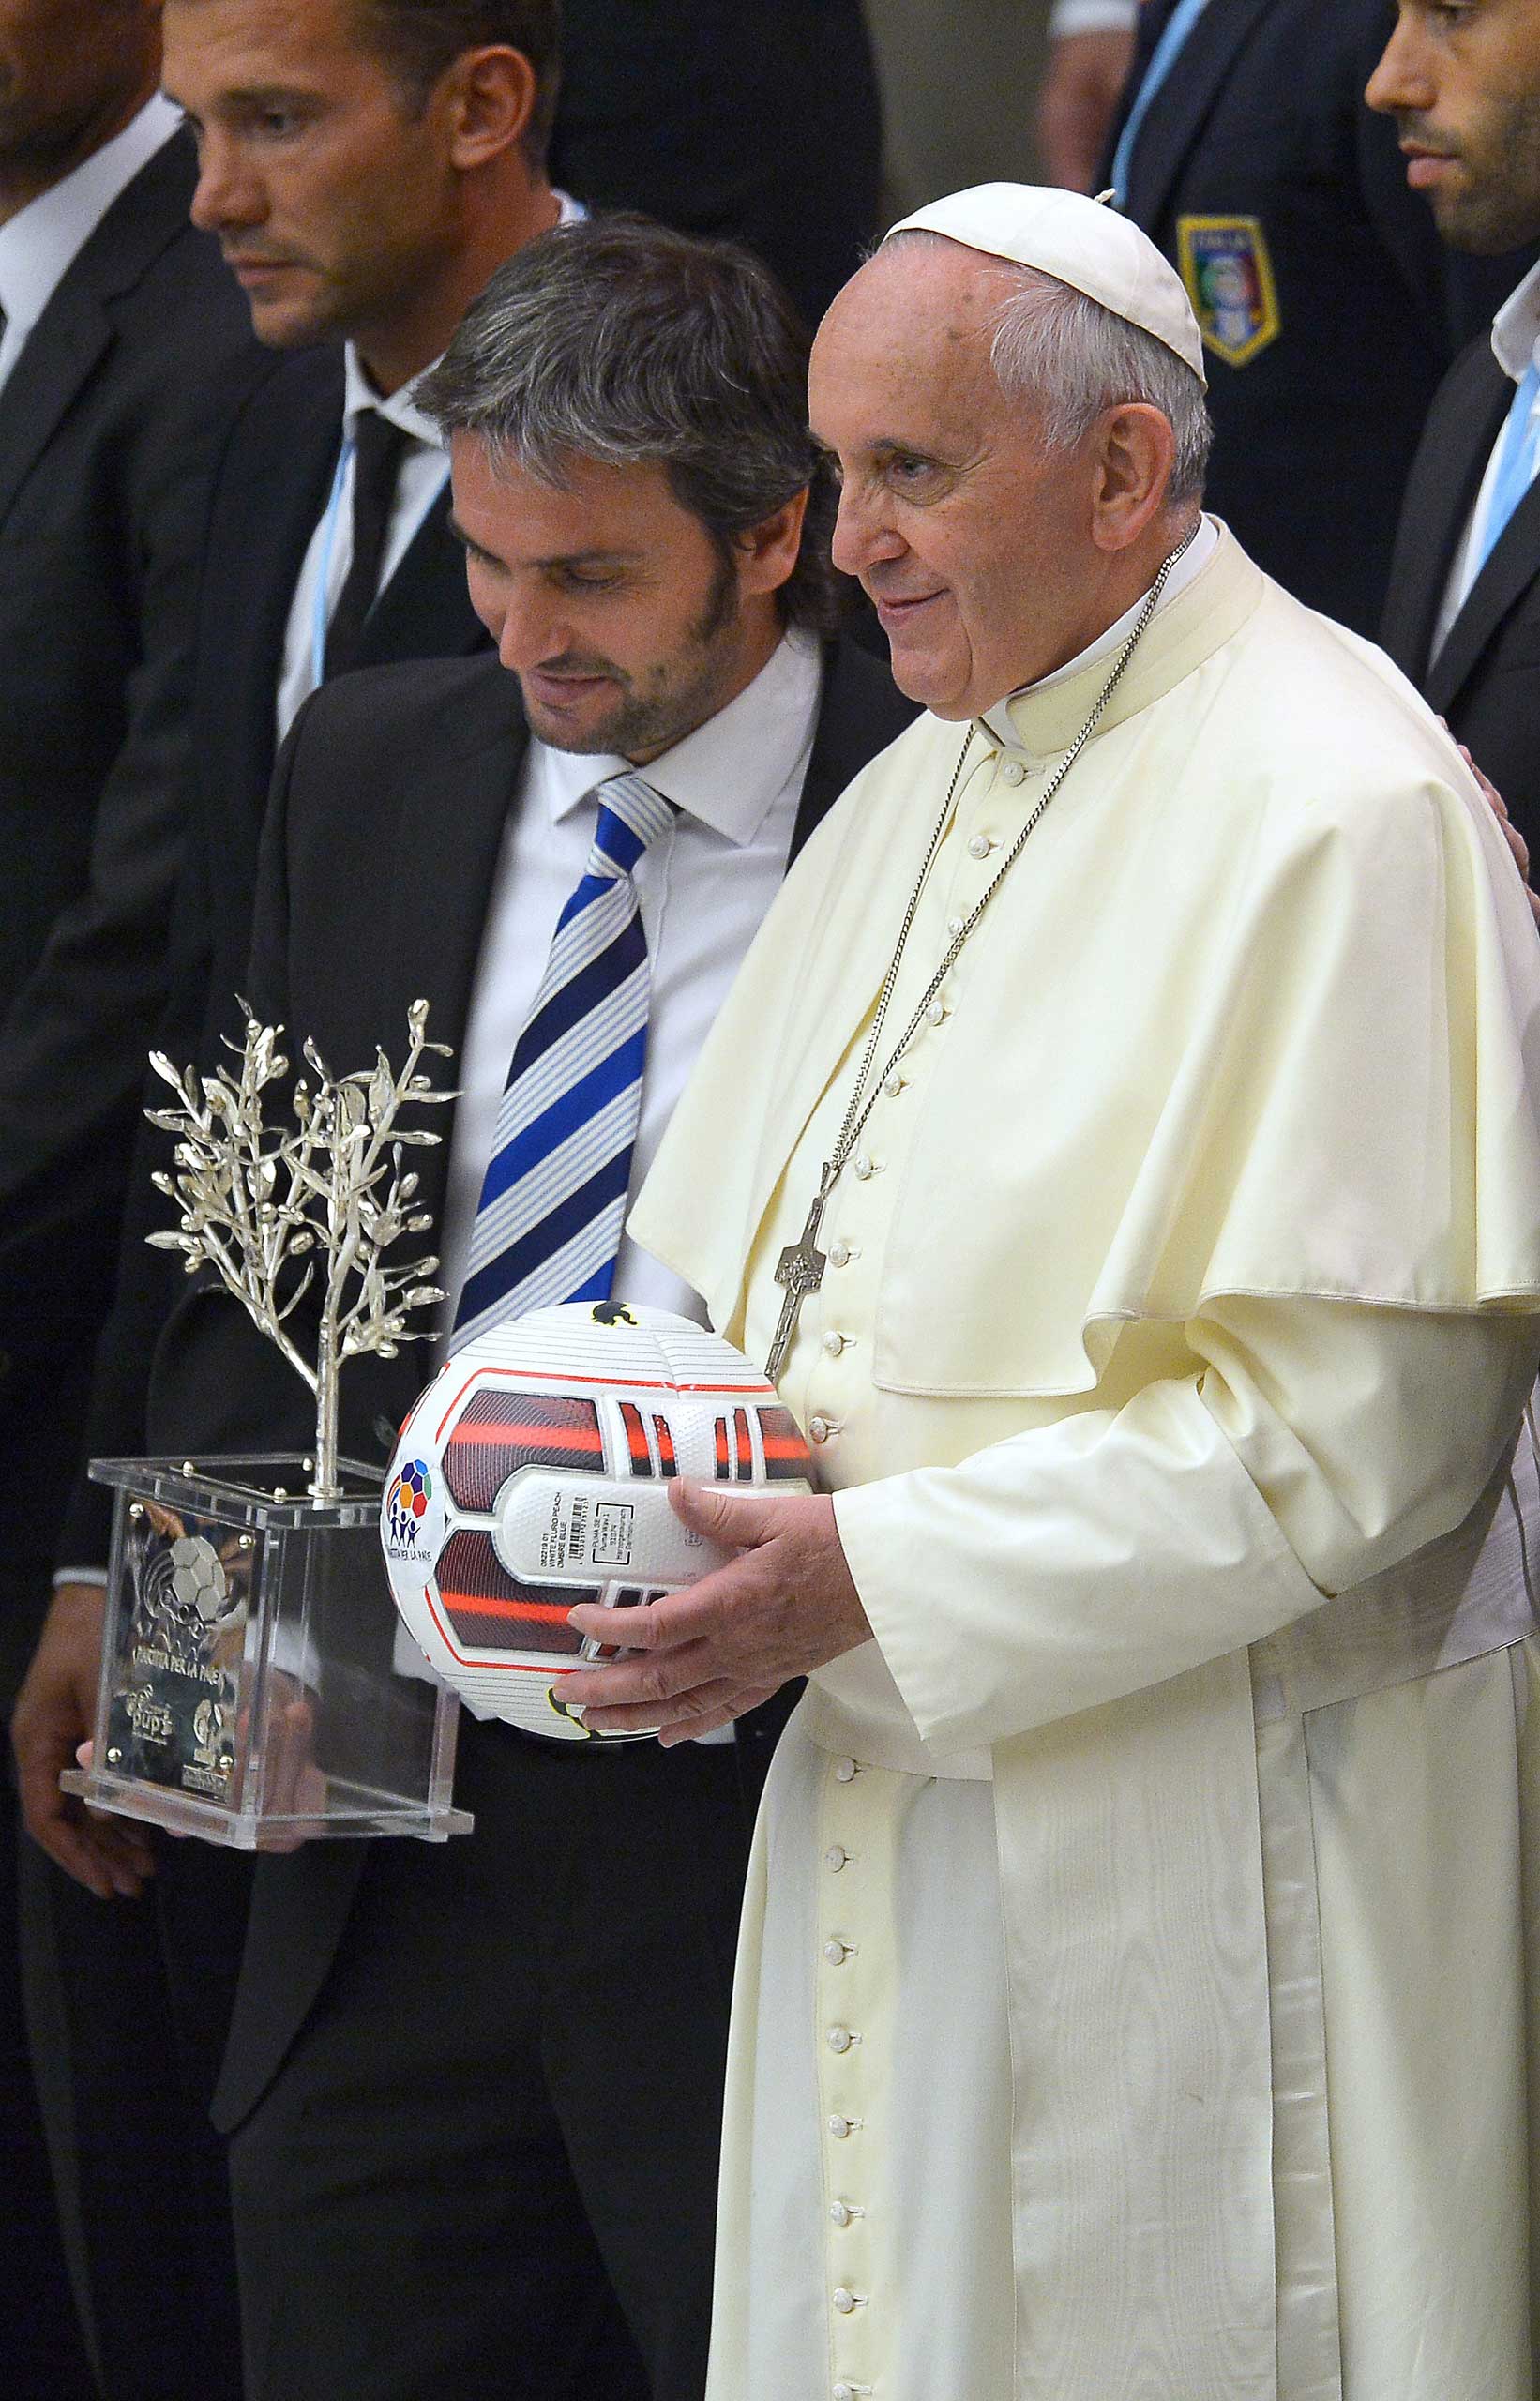 Pope Francis stands next to Argentinian craftsman Adrian Pallarols as he poses for the family photo with international football players at the Vatican on Sept. 2014 prior to an inter-religious "match for peace" soccer game that played at Rome's Olympic Stadium.